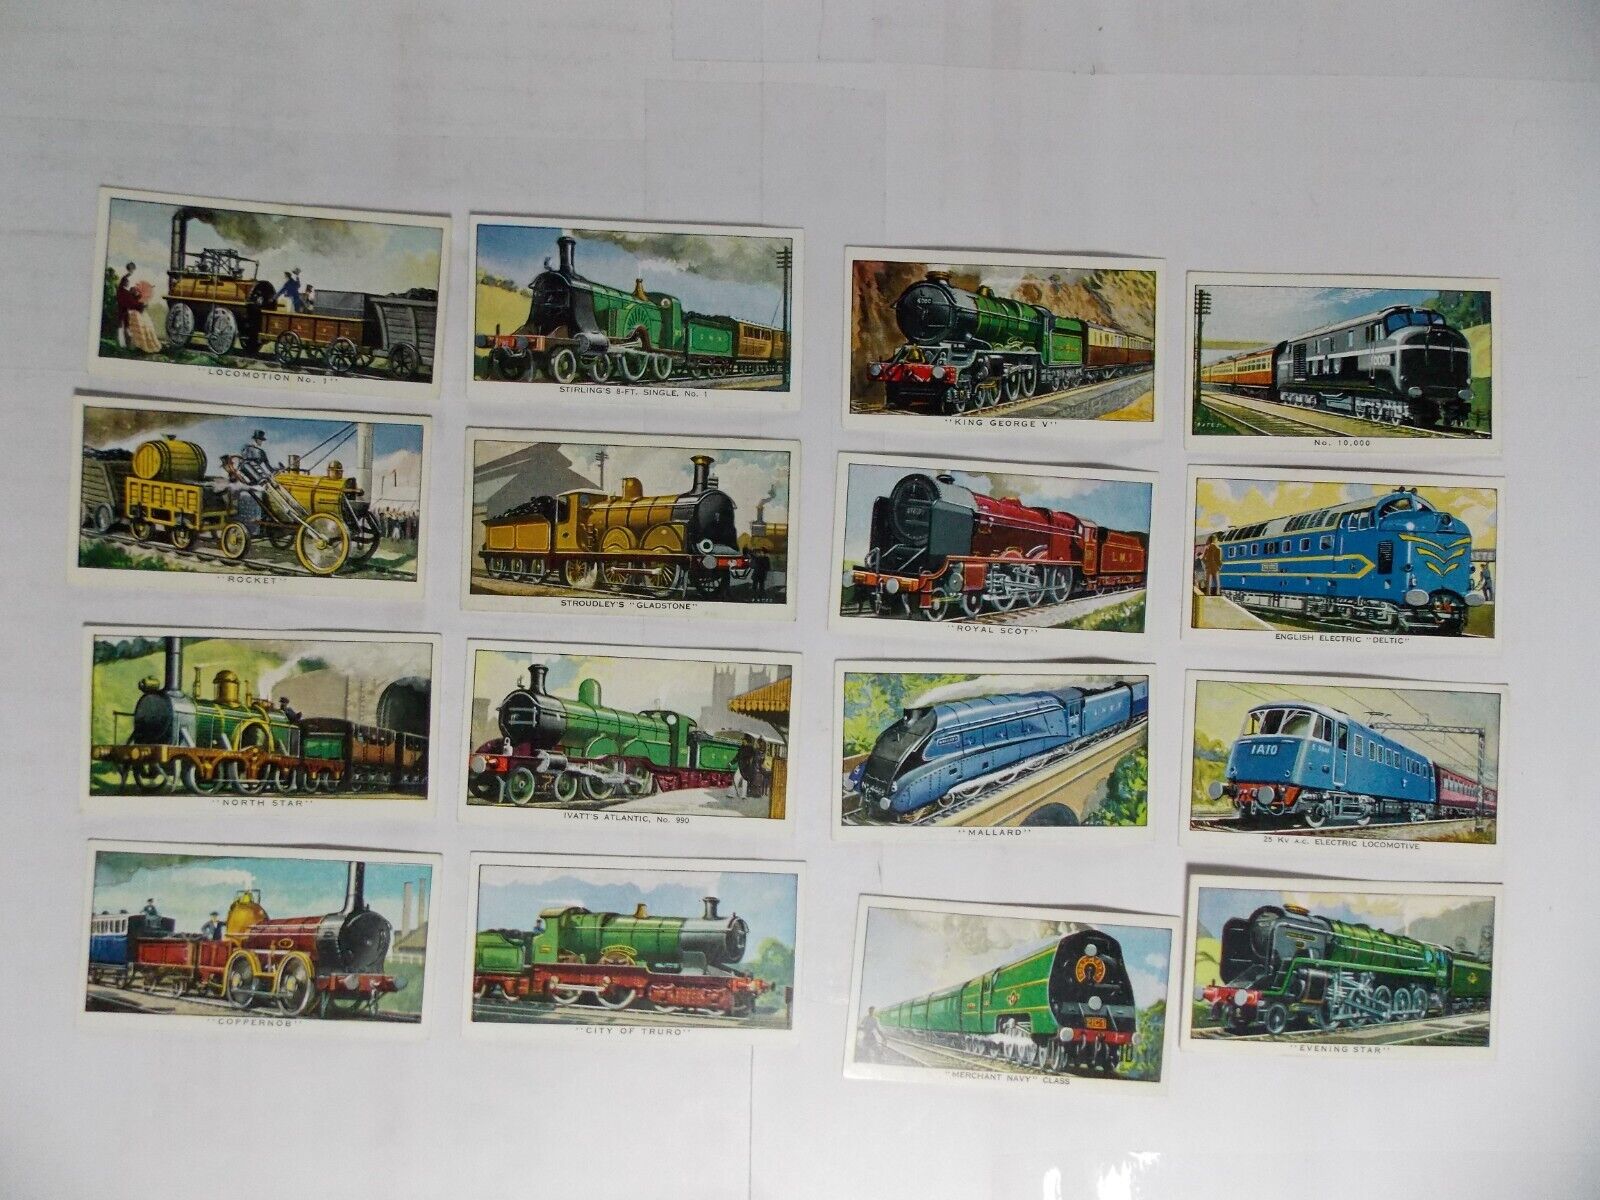 Kelloggs Trade Cards Story of the Locomotive 1st Series 1960s Complete set 16